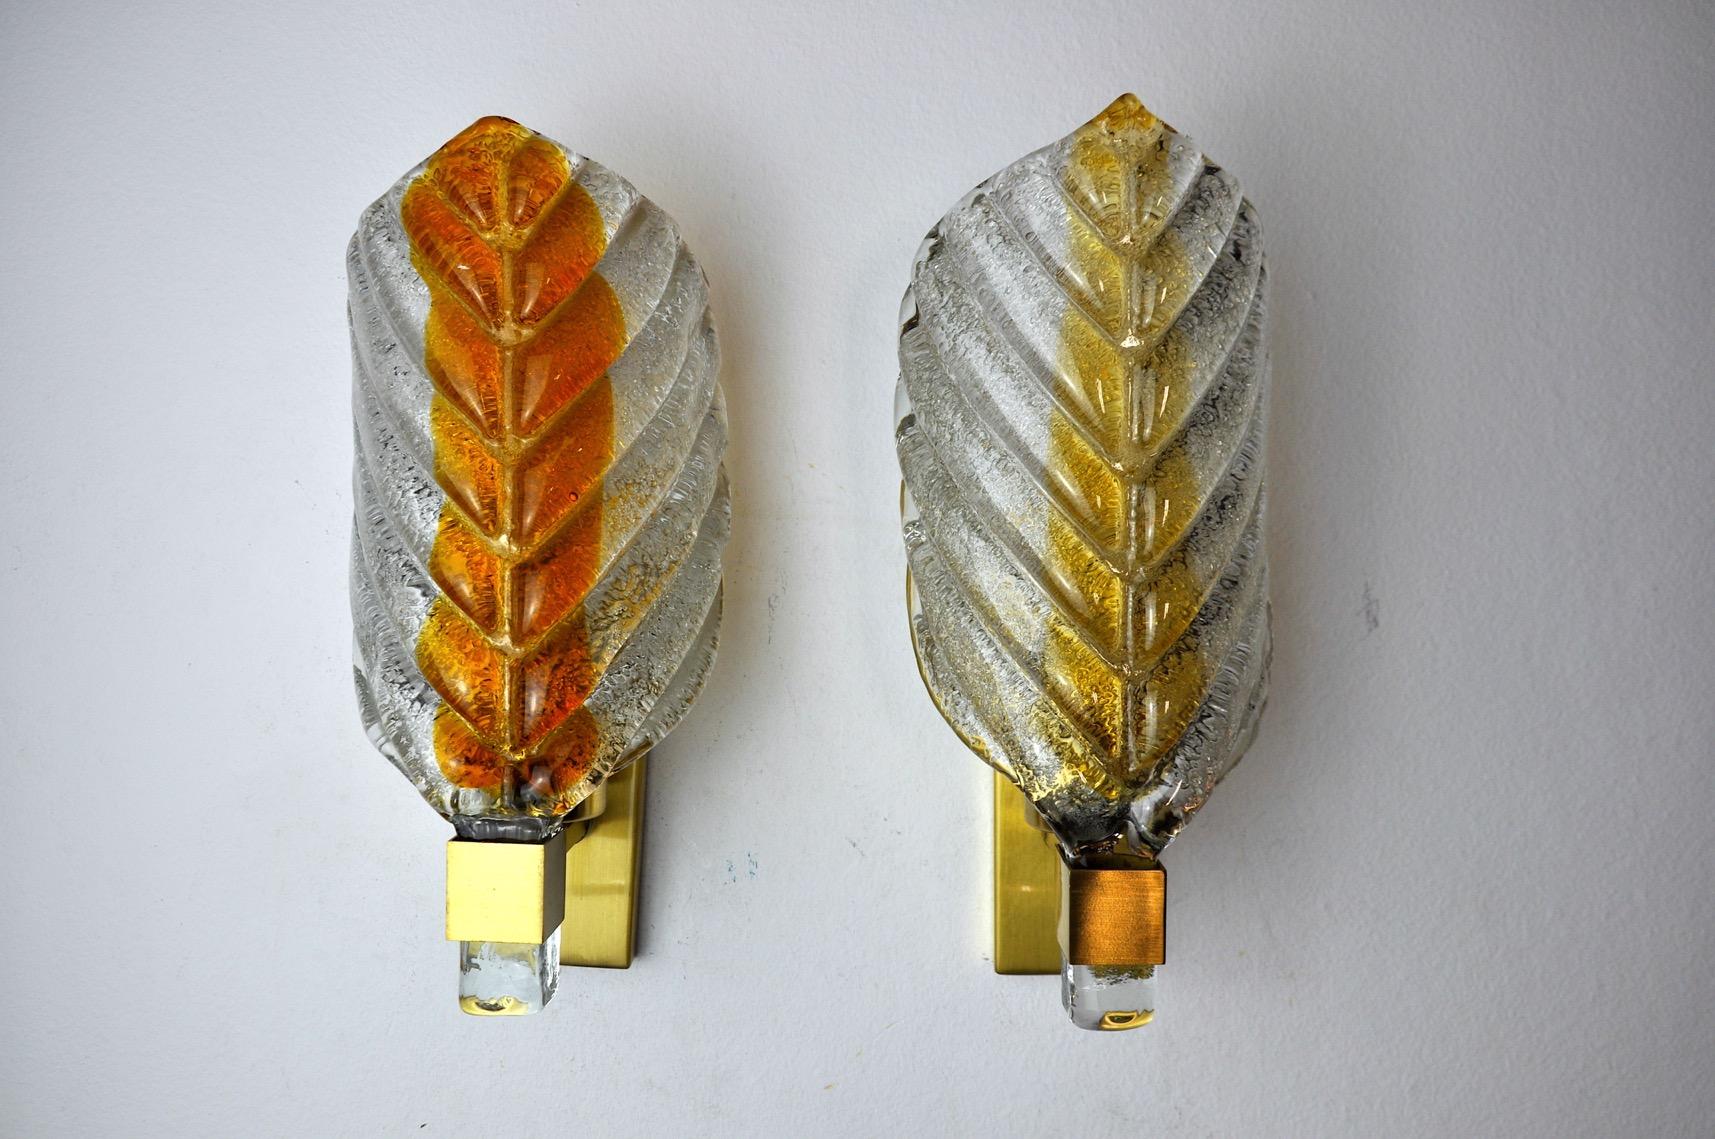 Superb and rare pair of leaf-shaped sconces, designed and produced in murano, italy, in the 1970s. Both crystals have a distinct orange tone. The sconces are of a gold metal structure and leaf-shaped frosted glass. The diffused light is soft and